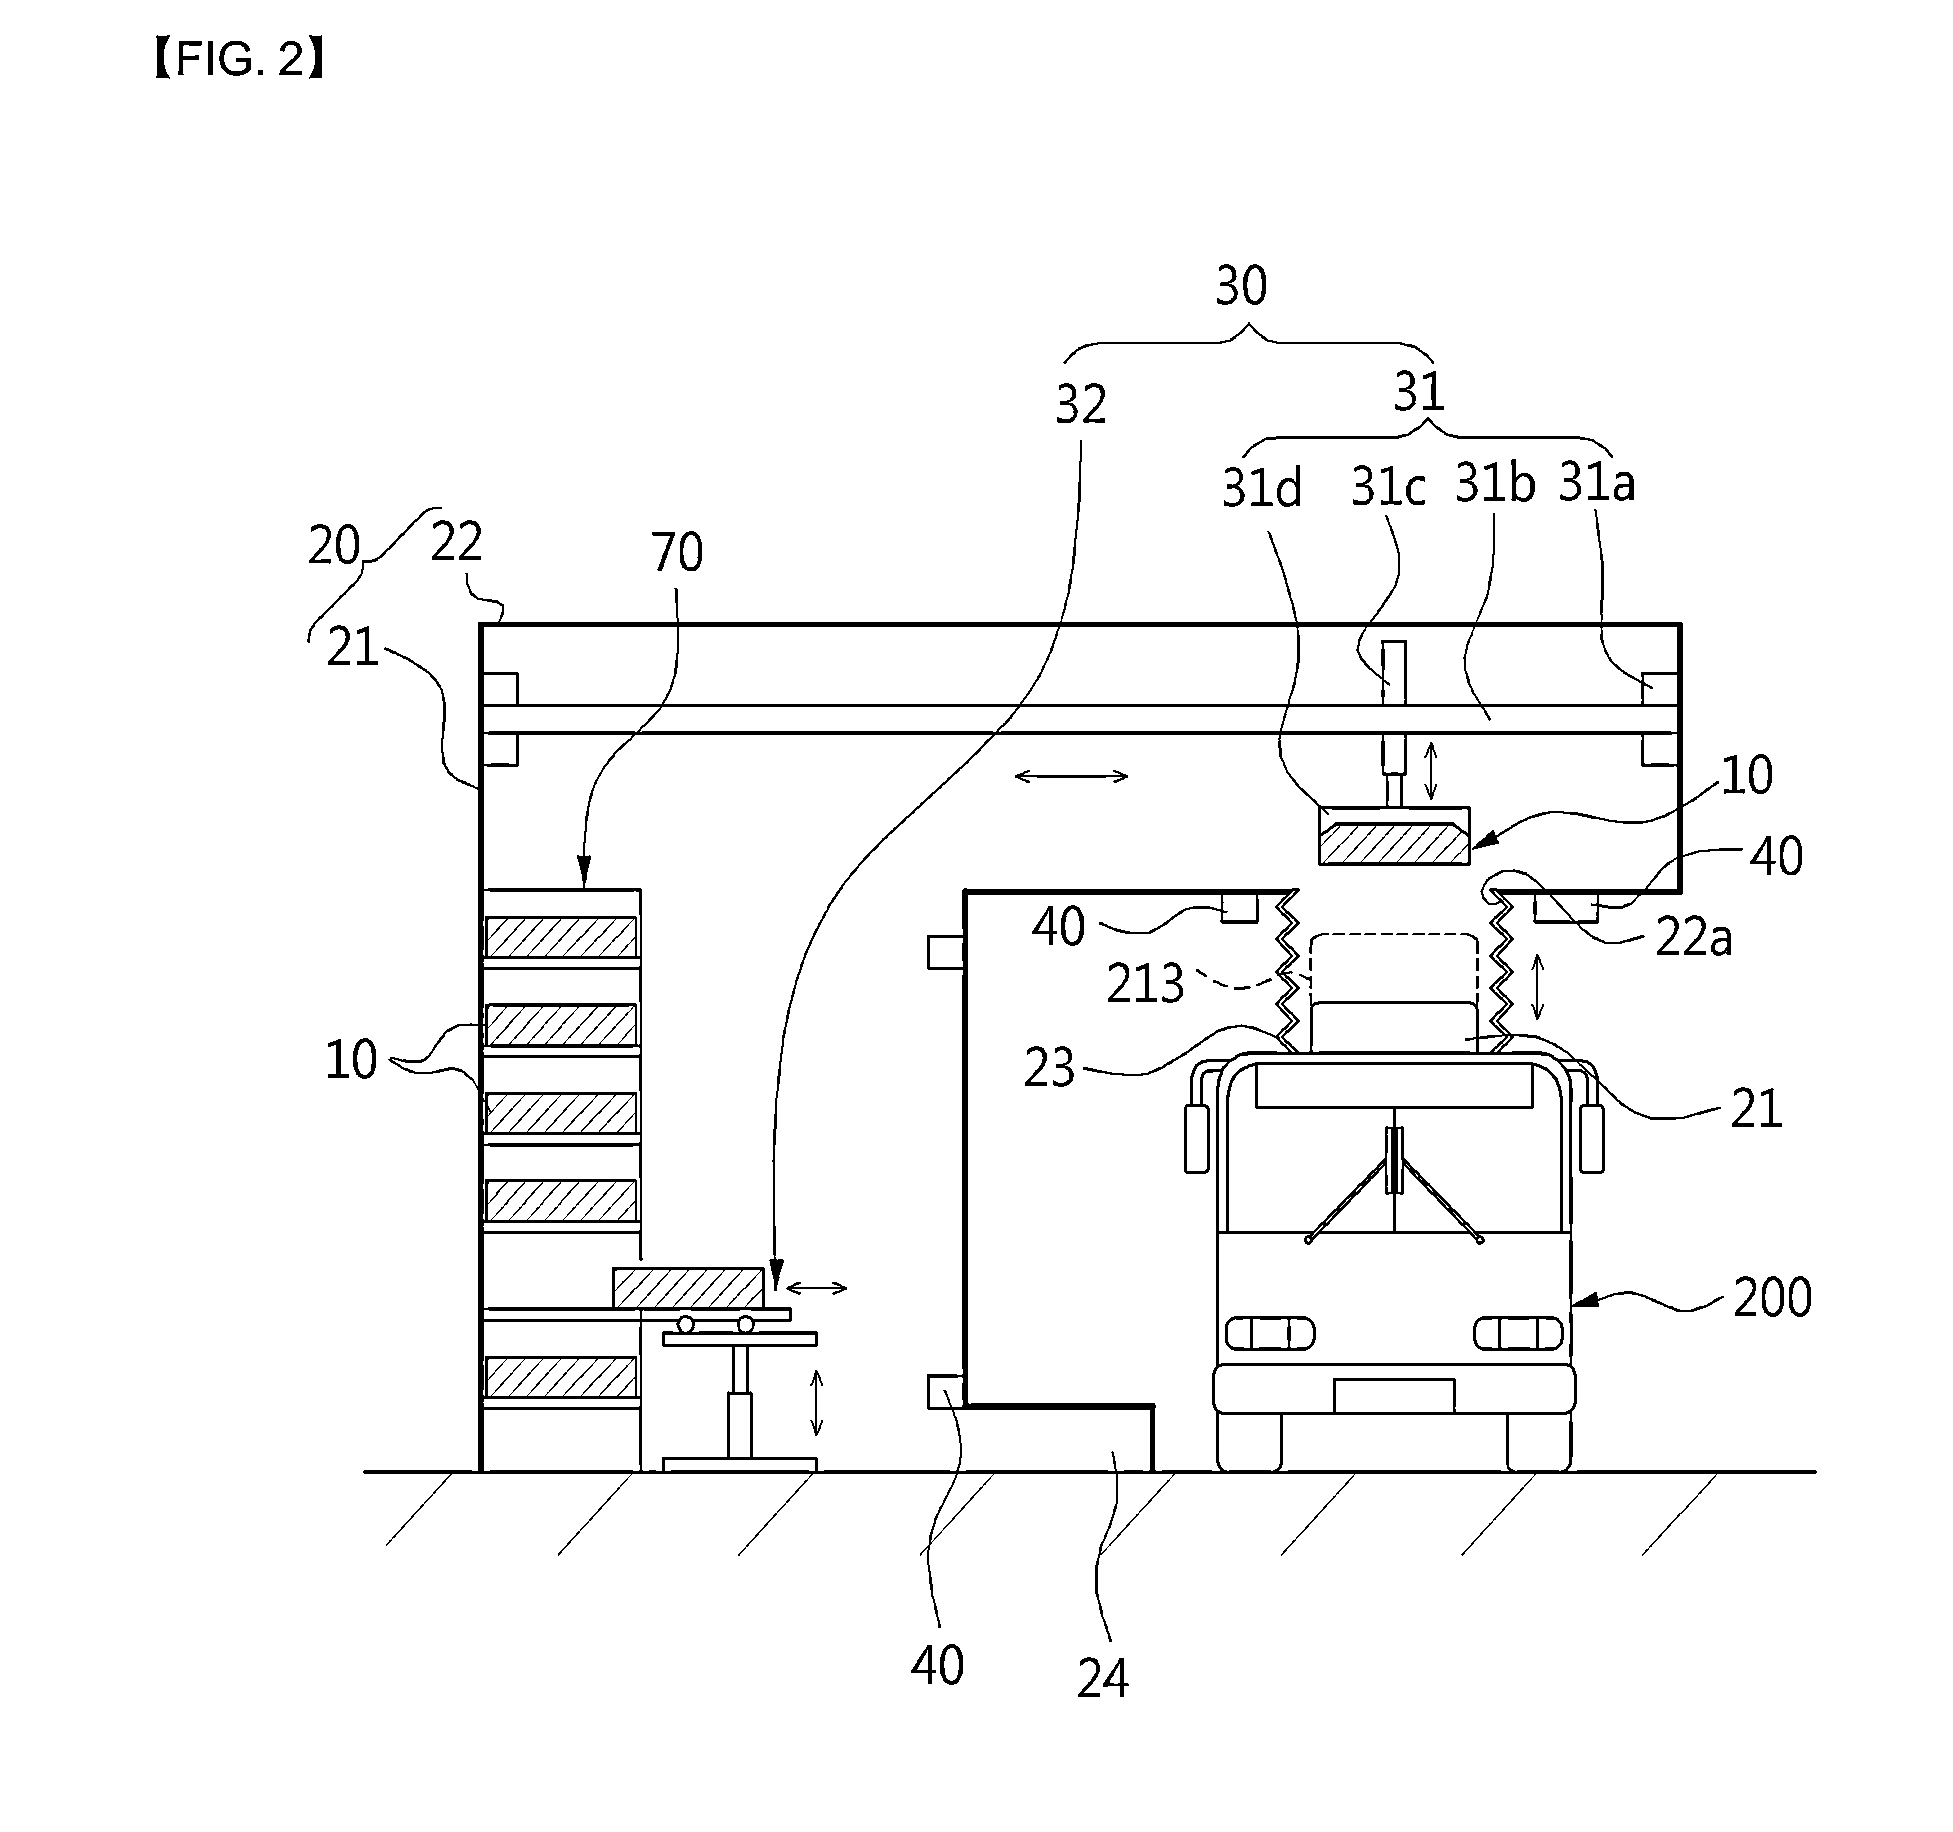 Battery exchanging-type charging station system for electric vehicle